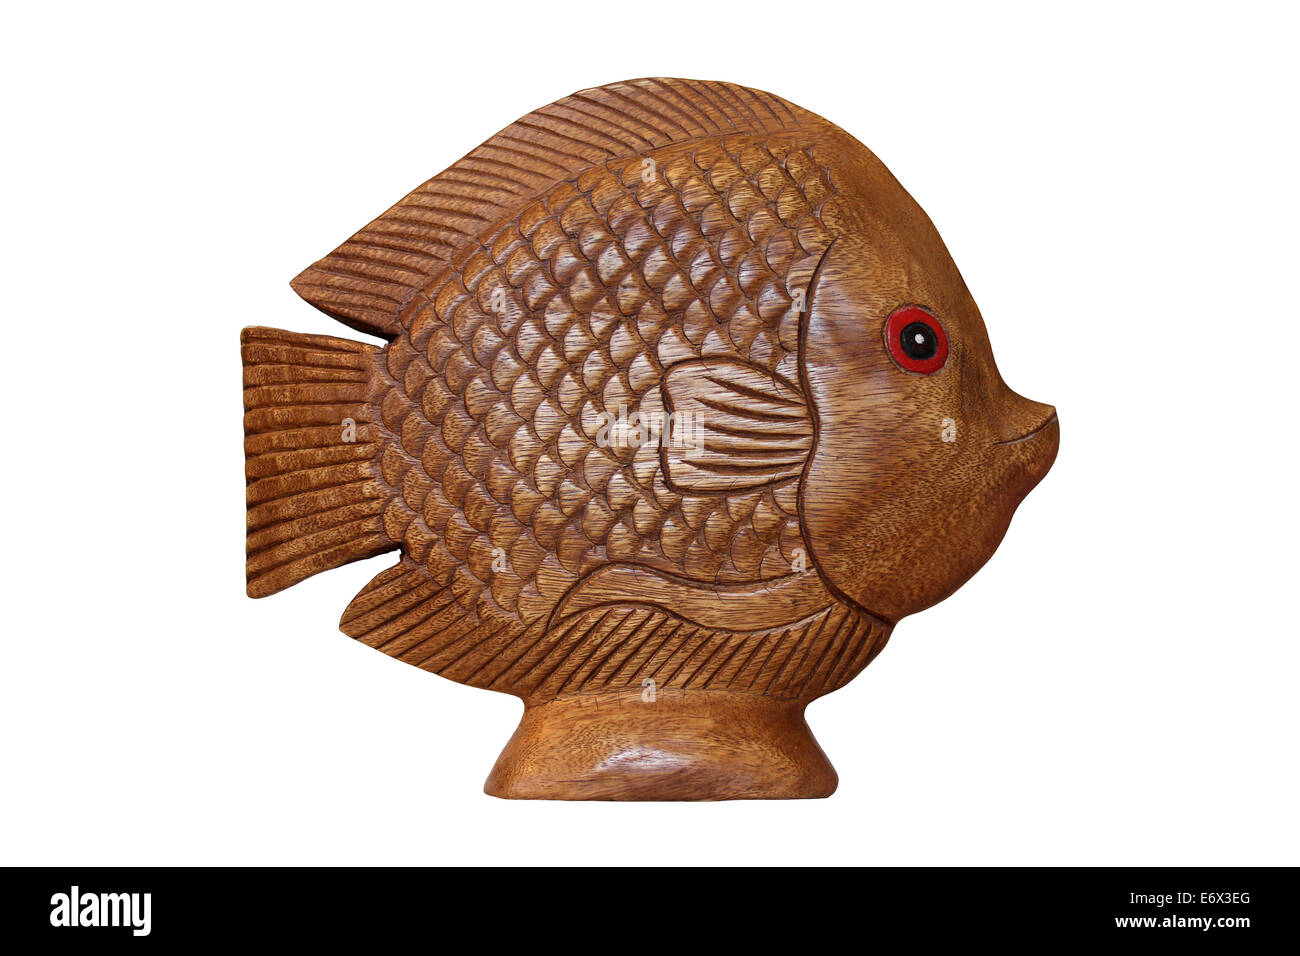 Wooden Carved Butterflyfish Stock Photo